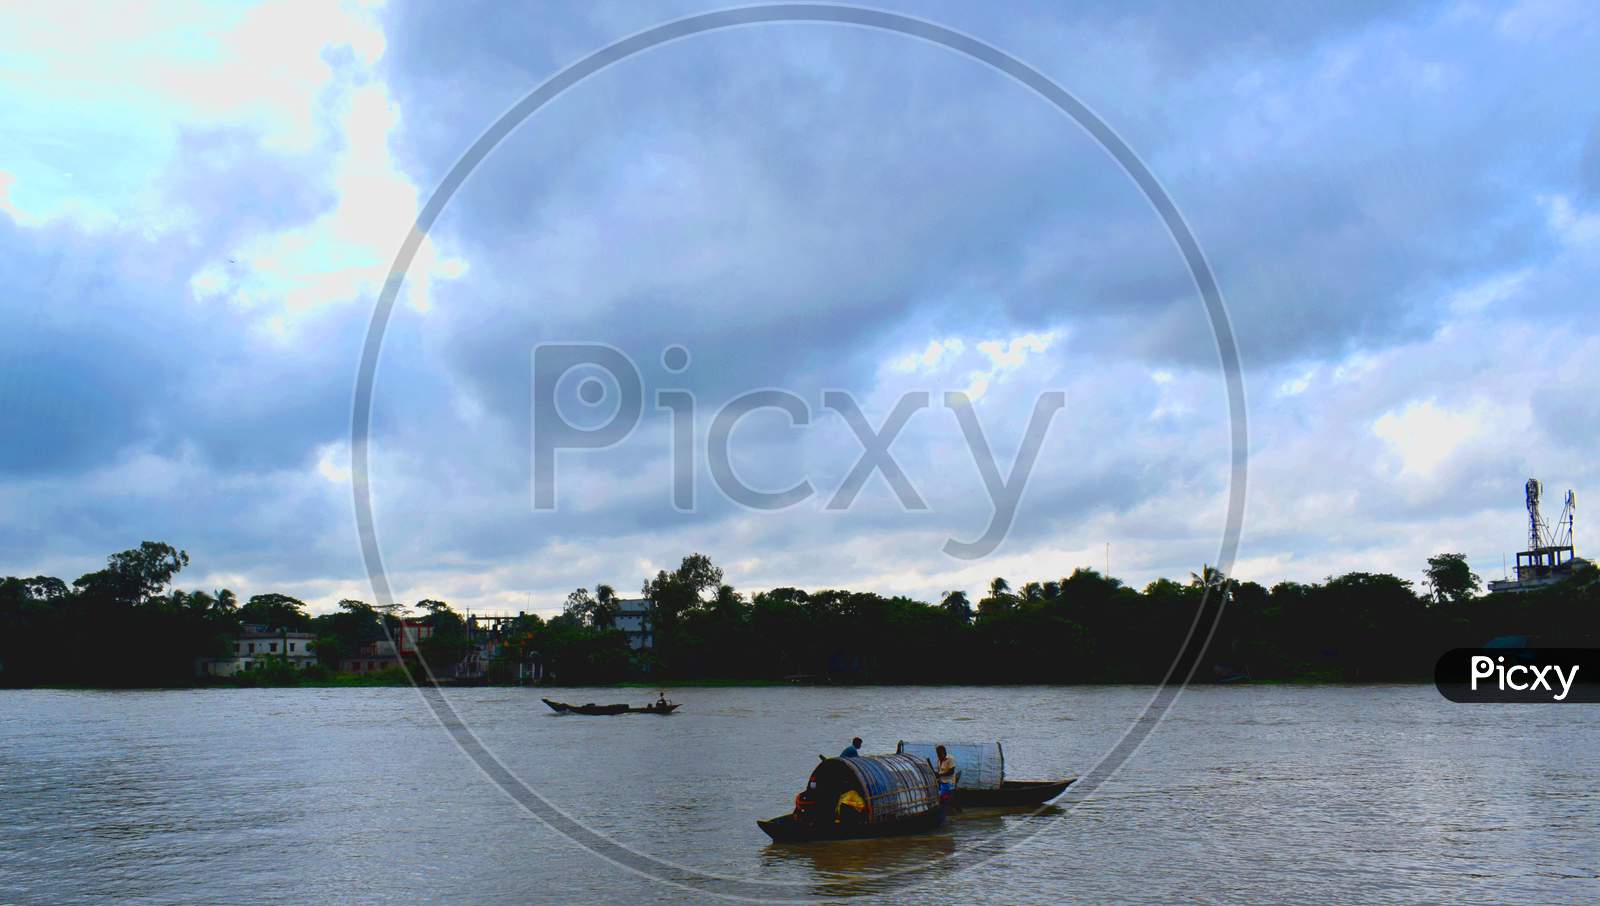 River Side Local People Lifestyle,River View, Traditional Small Boat With Cloudy Sky .The Photo Was Taken From Shitolokkha River, Narayanganj,Rupgonj On 24Th September 2020.